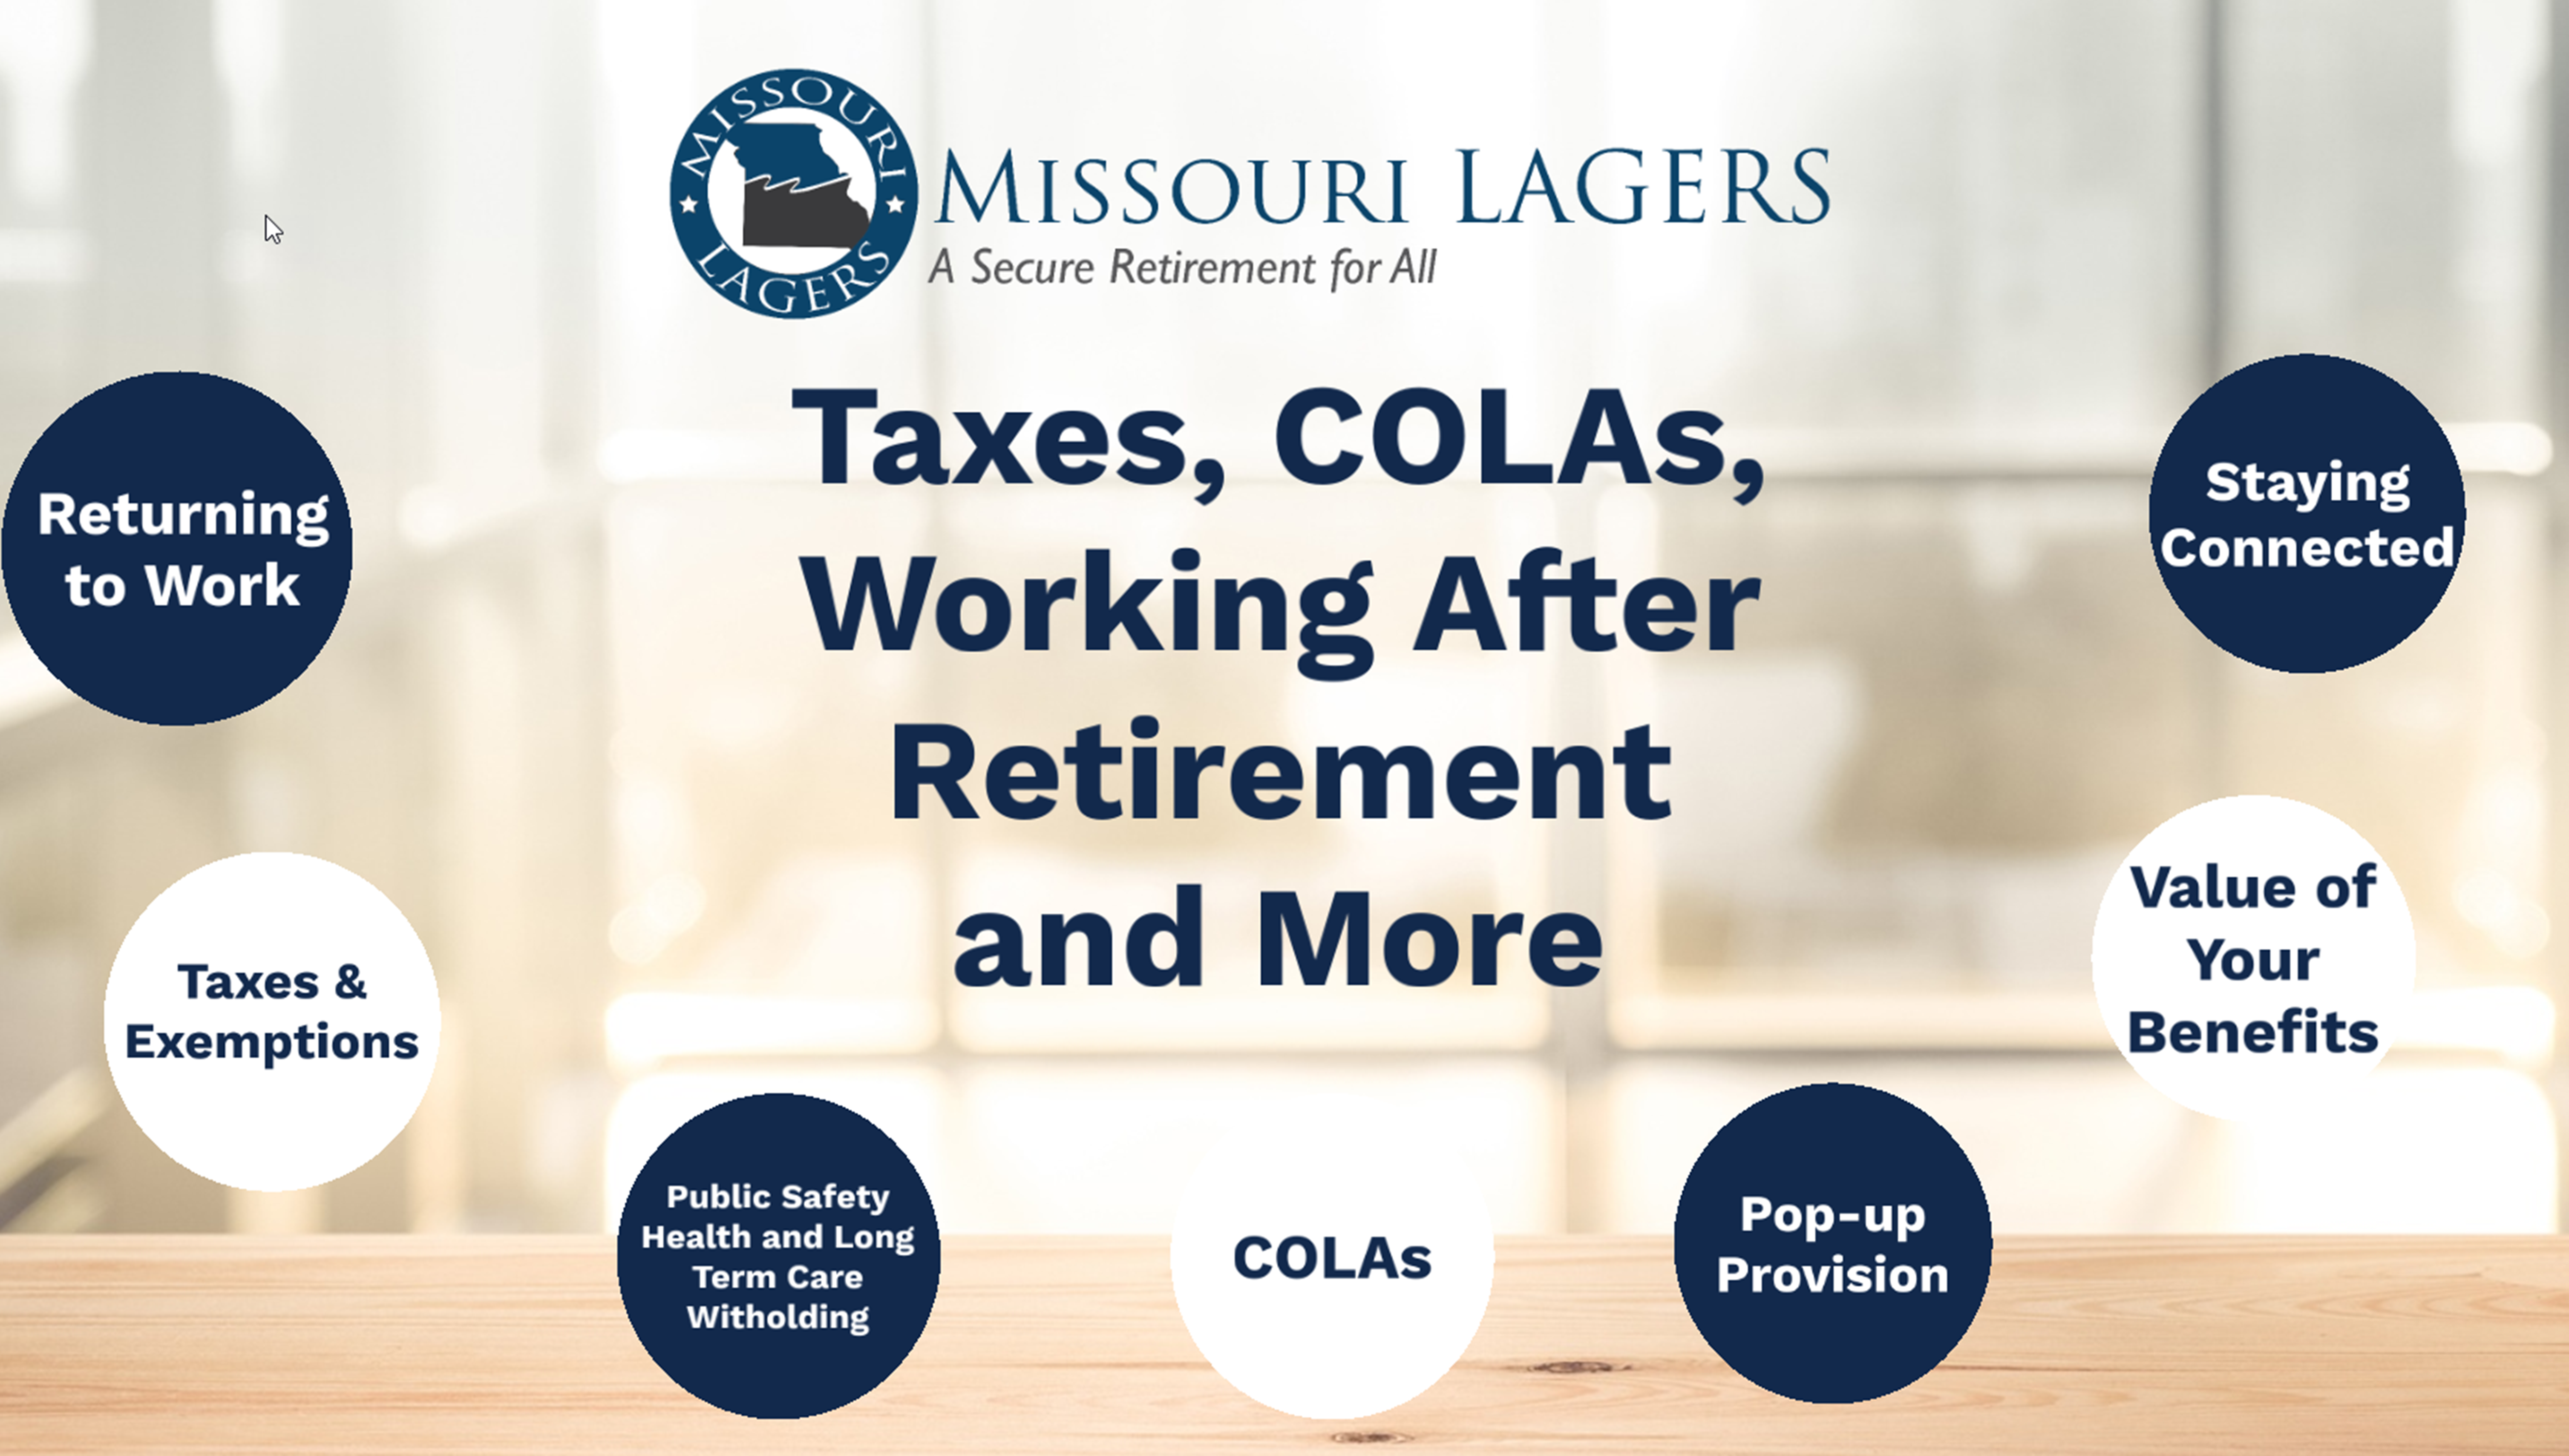 Taxes, COLAs, and Working After Retirement Final